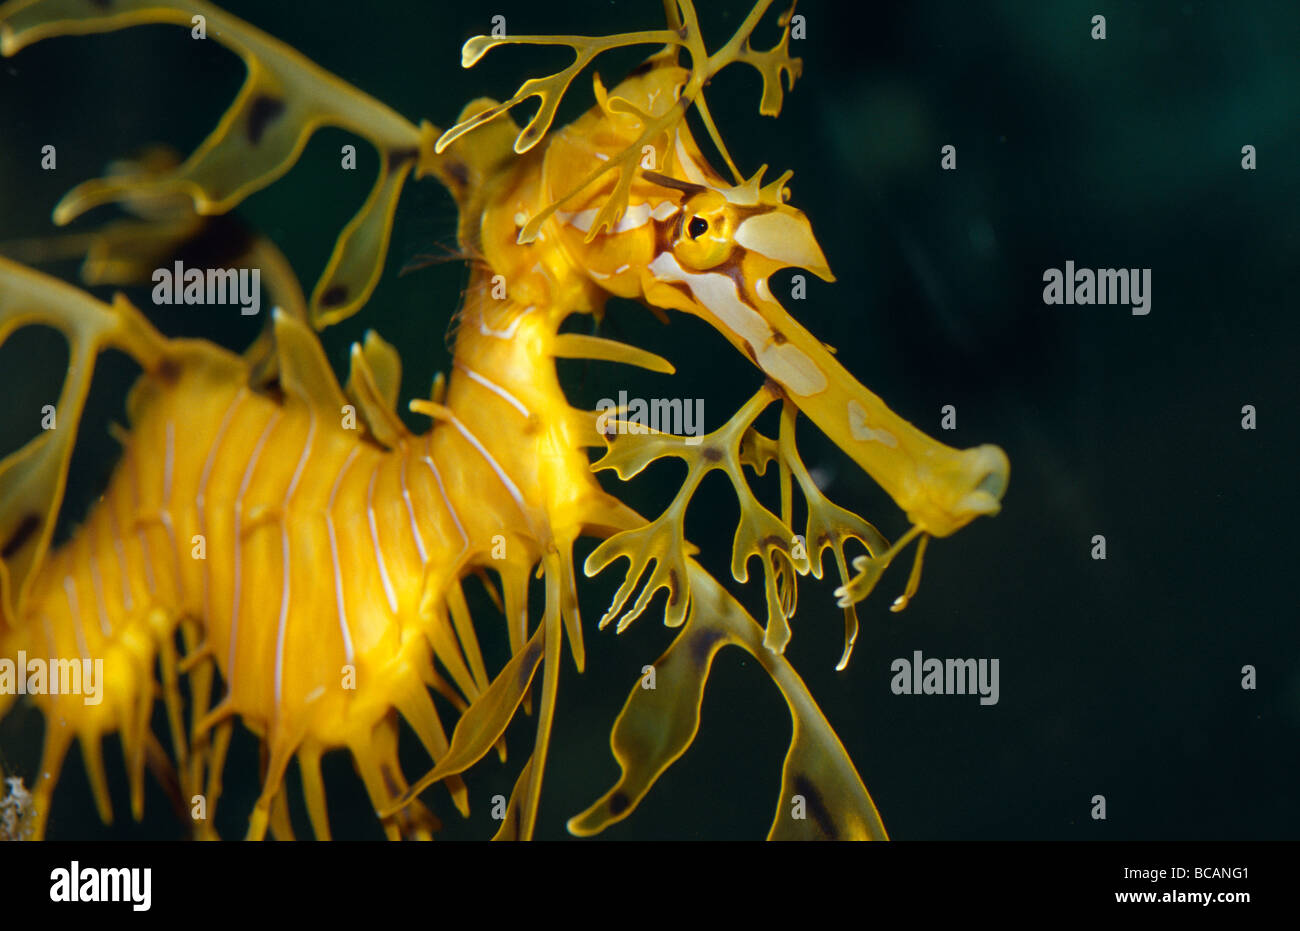 A diminutive Leafy Sea Dragon with delicate fins used for camouflage. Stock Photo